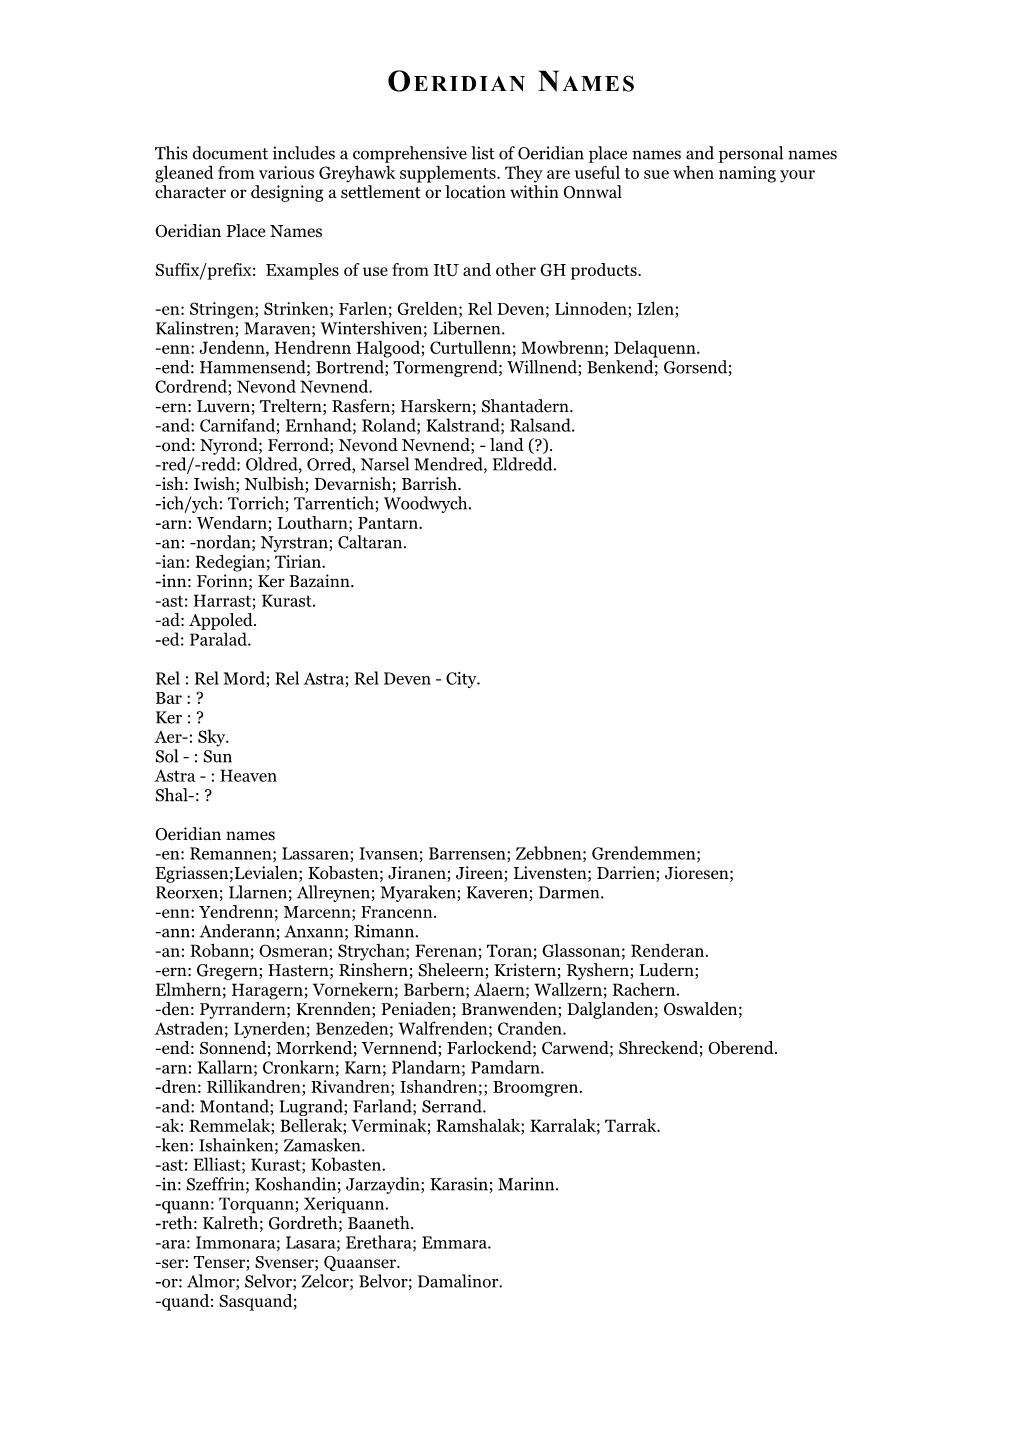 This Document Includes a Comprehensive List of Oeridian Place Names and Personal Names